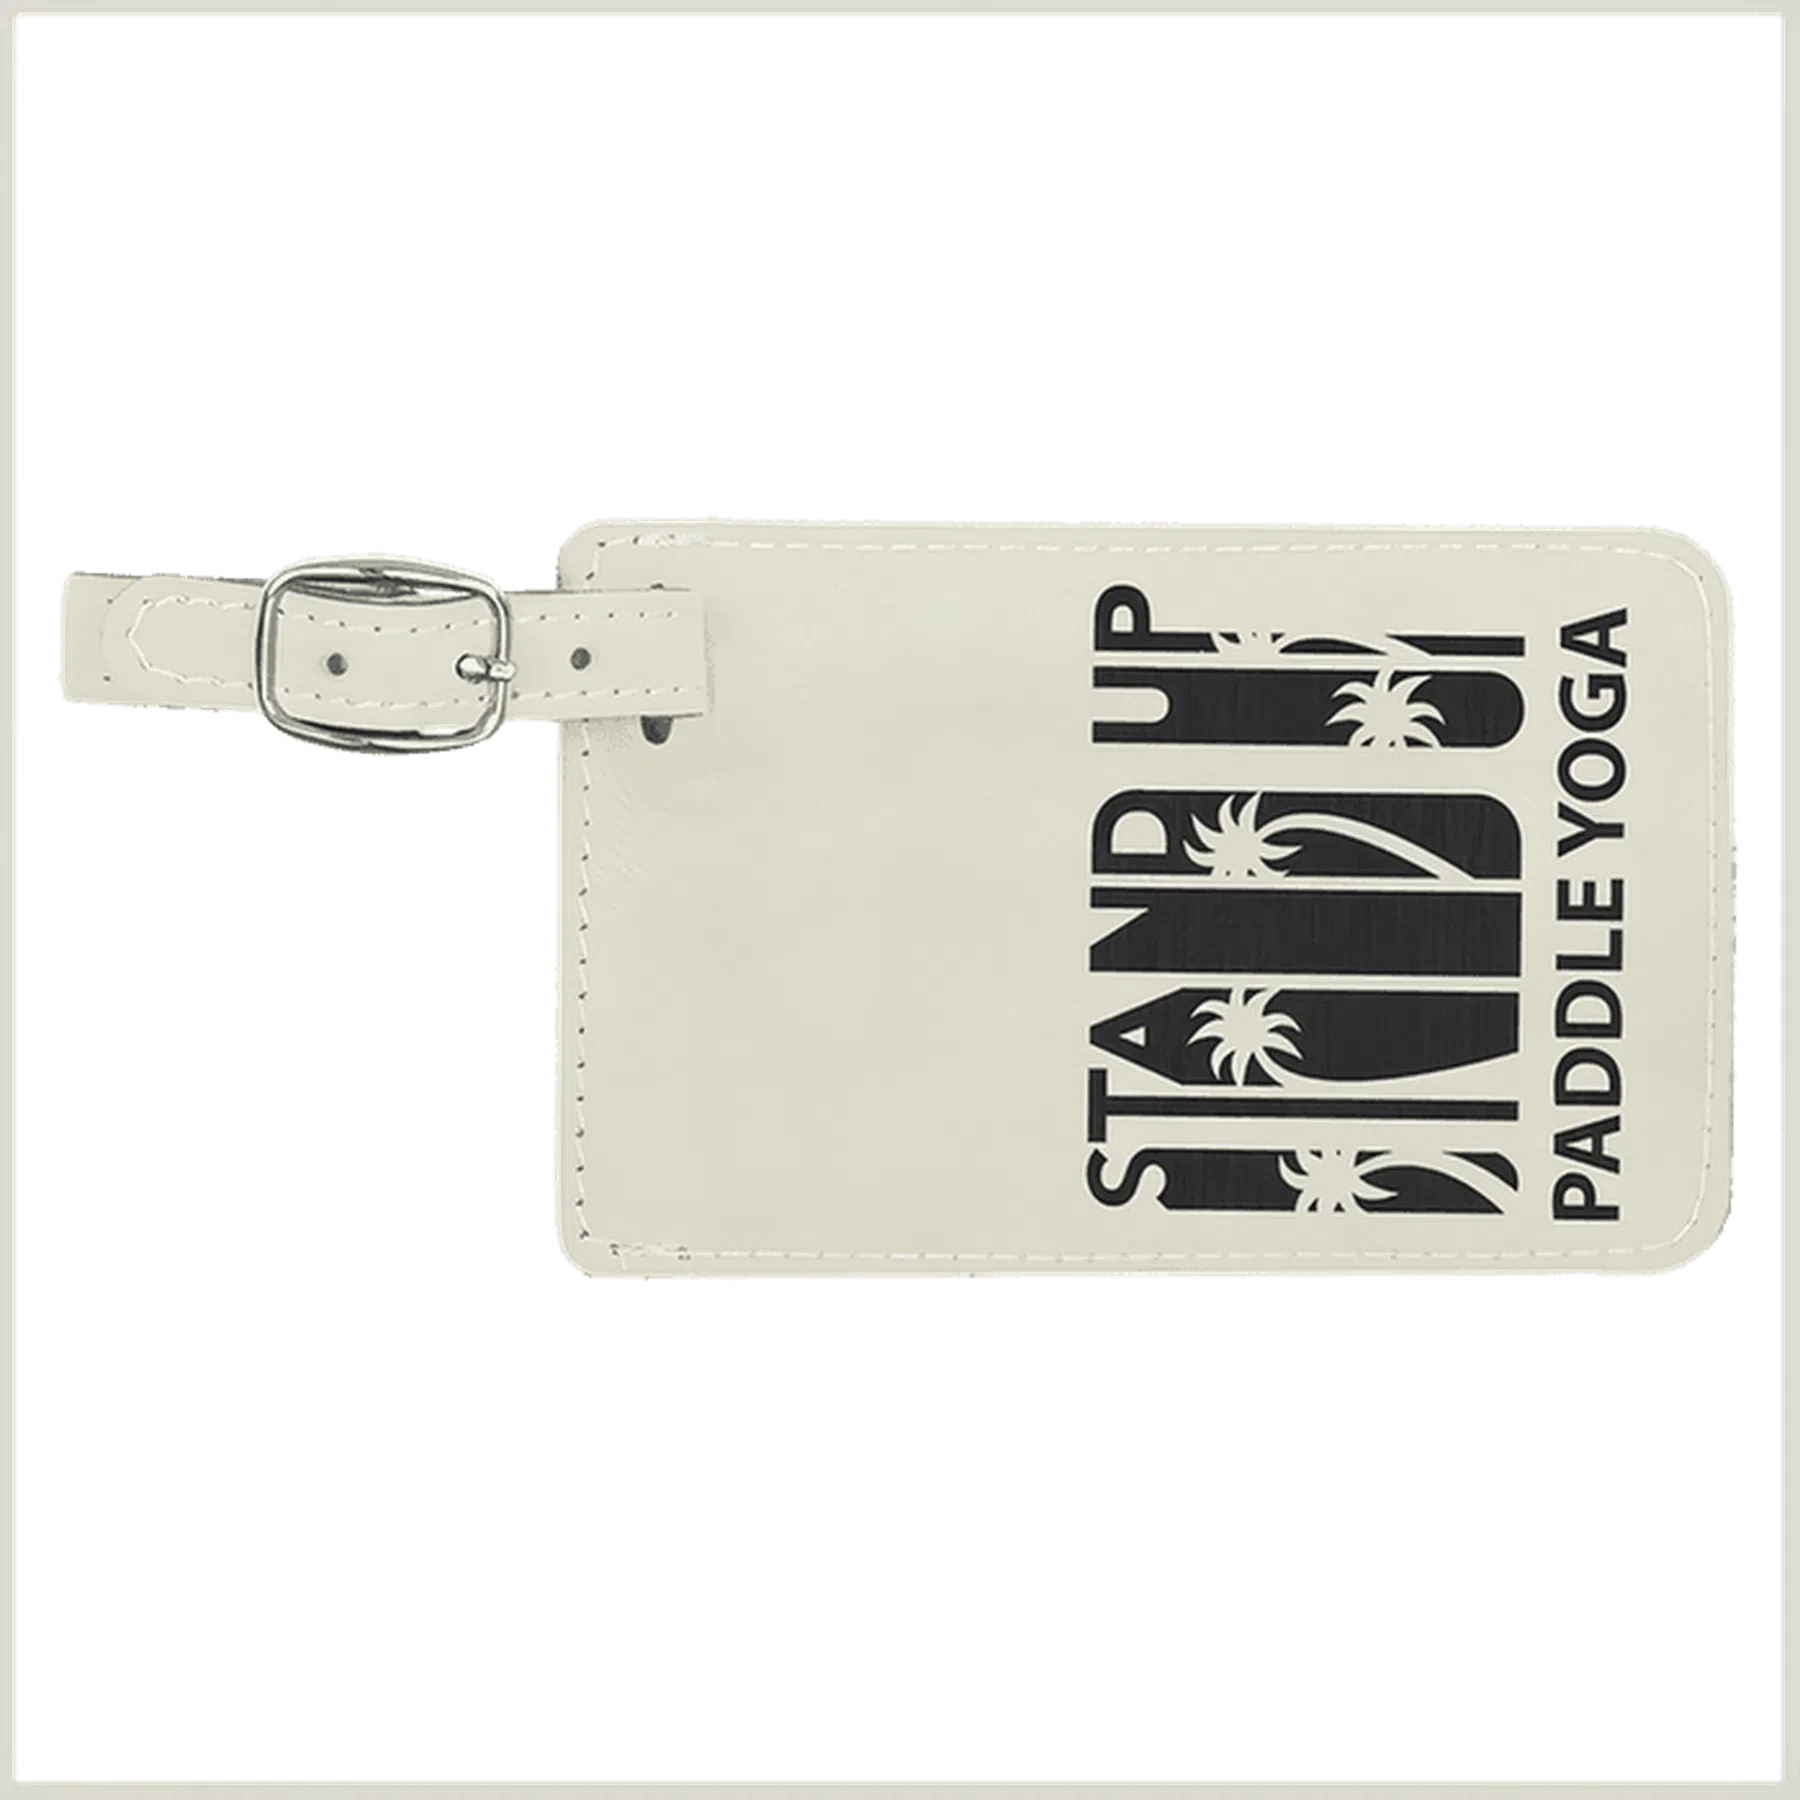 Leatherette Luggage Tag (Various Colors/Styles)